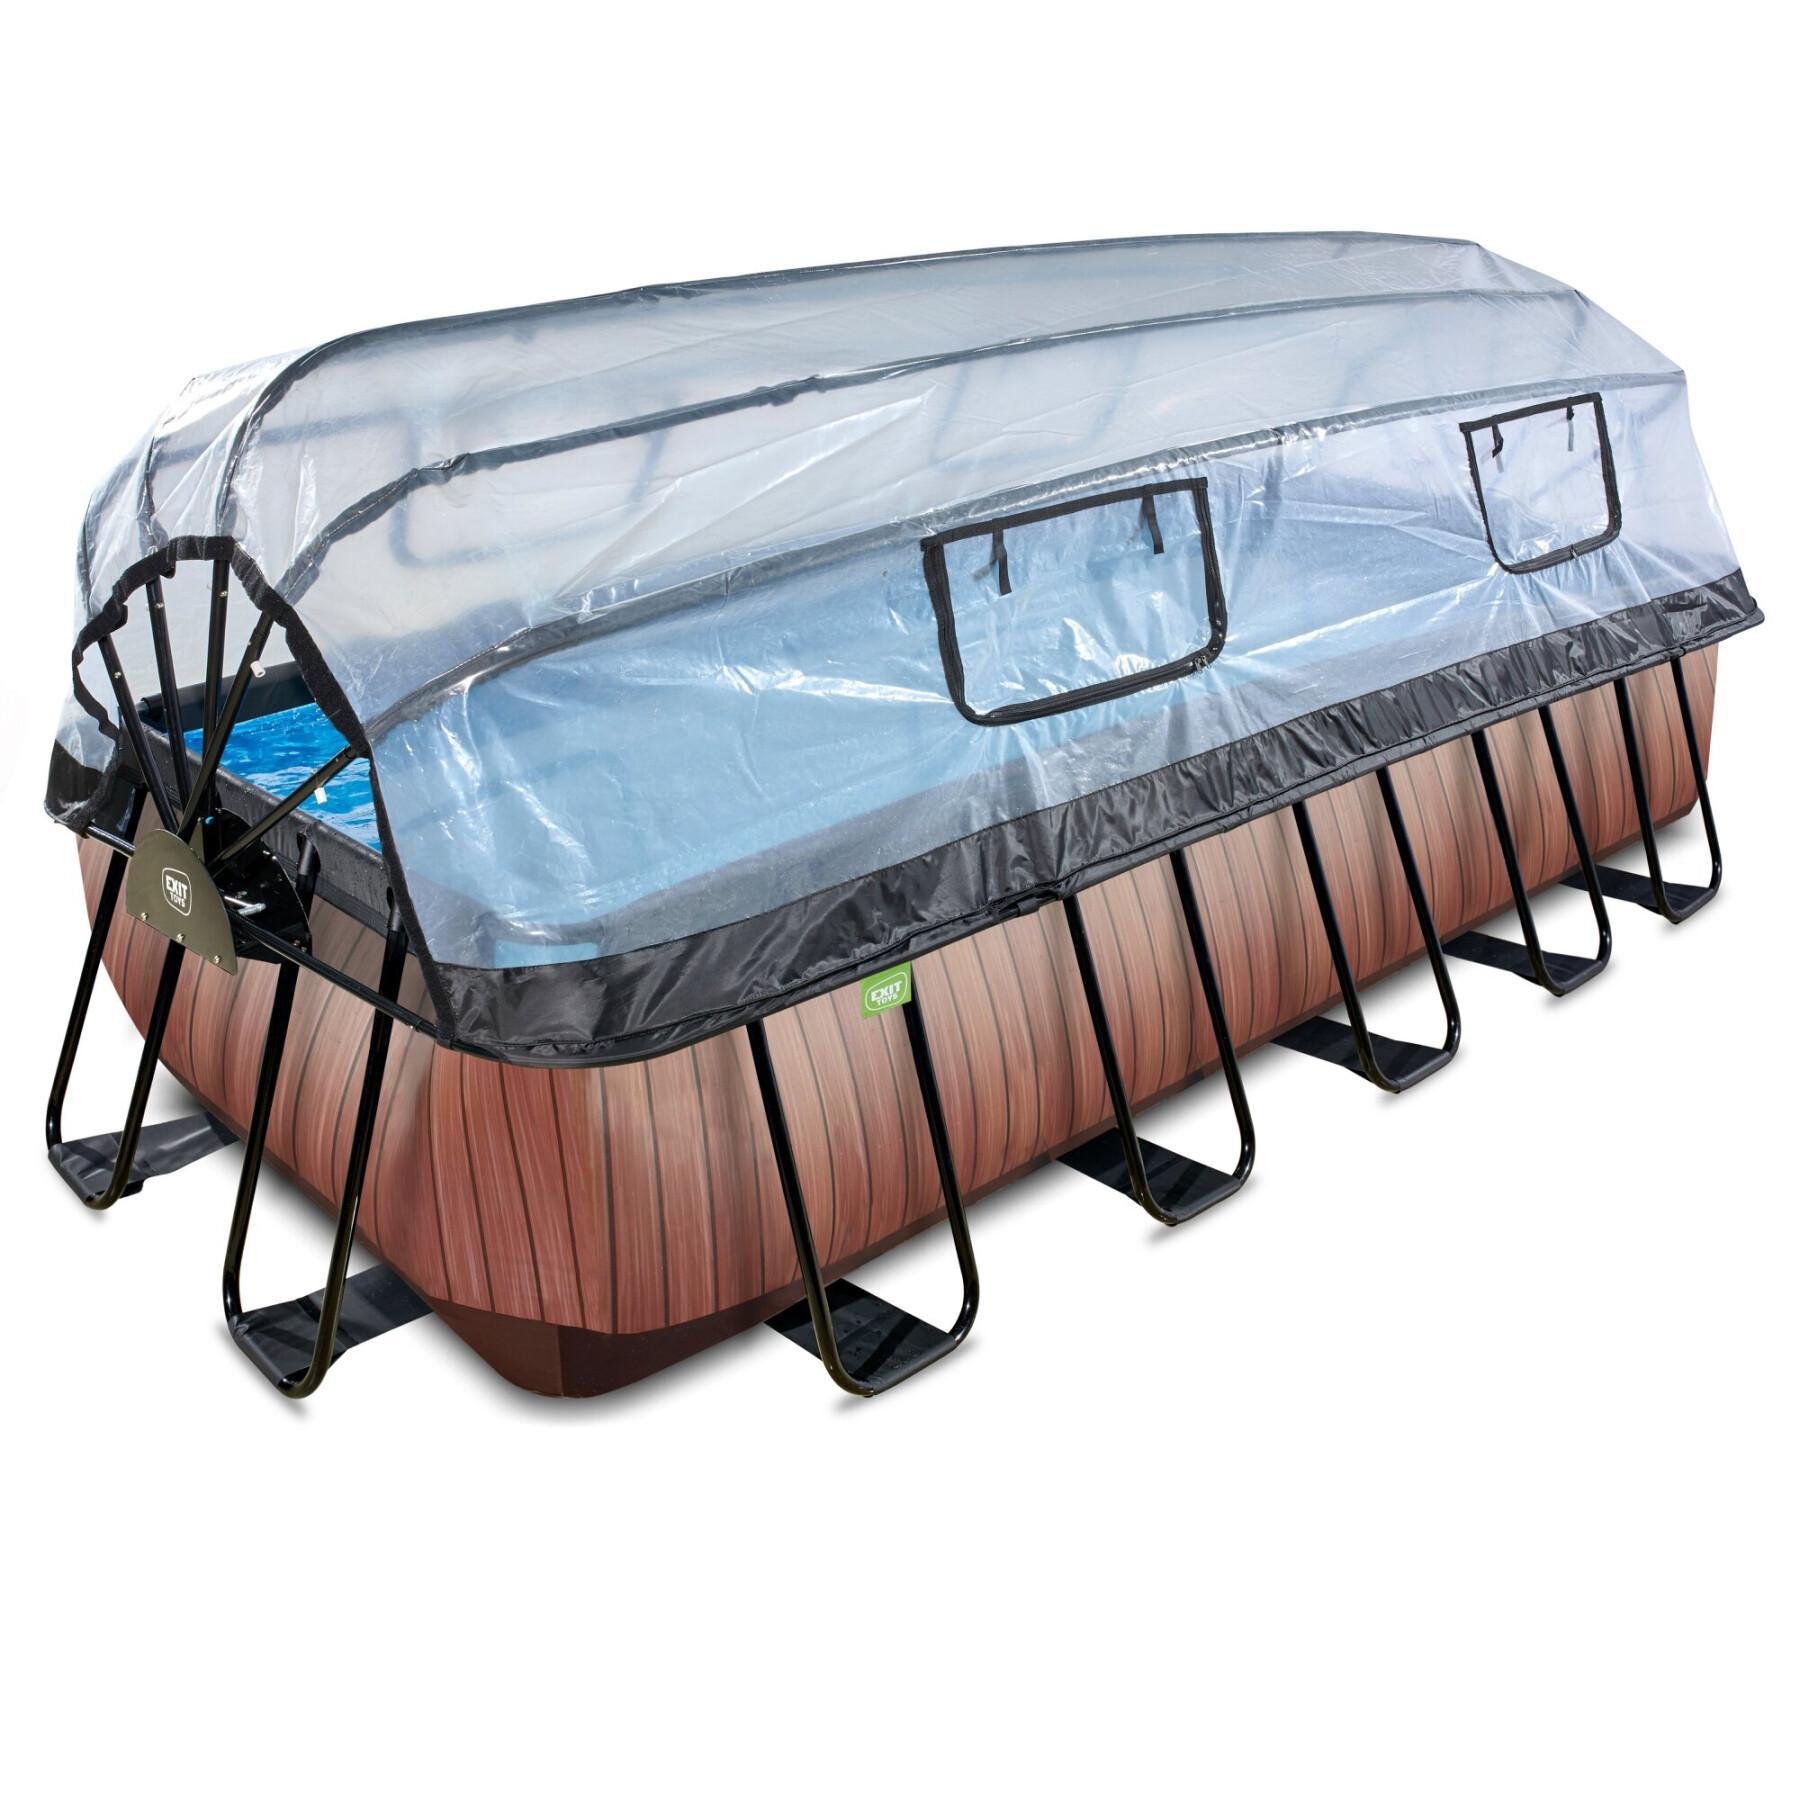 Swimming pool with sand filter pump and dome and child heat pump Exit Toys Wood 540 x 250 x 122 cm